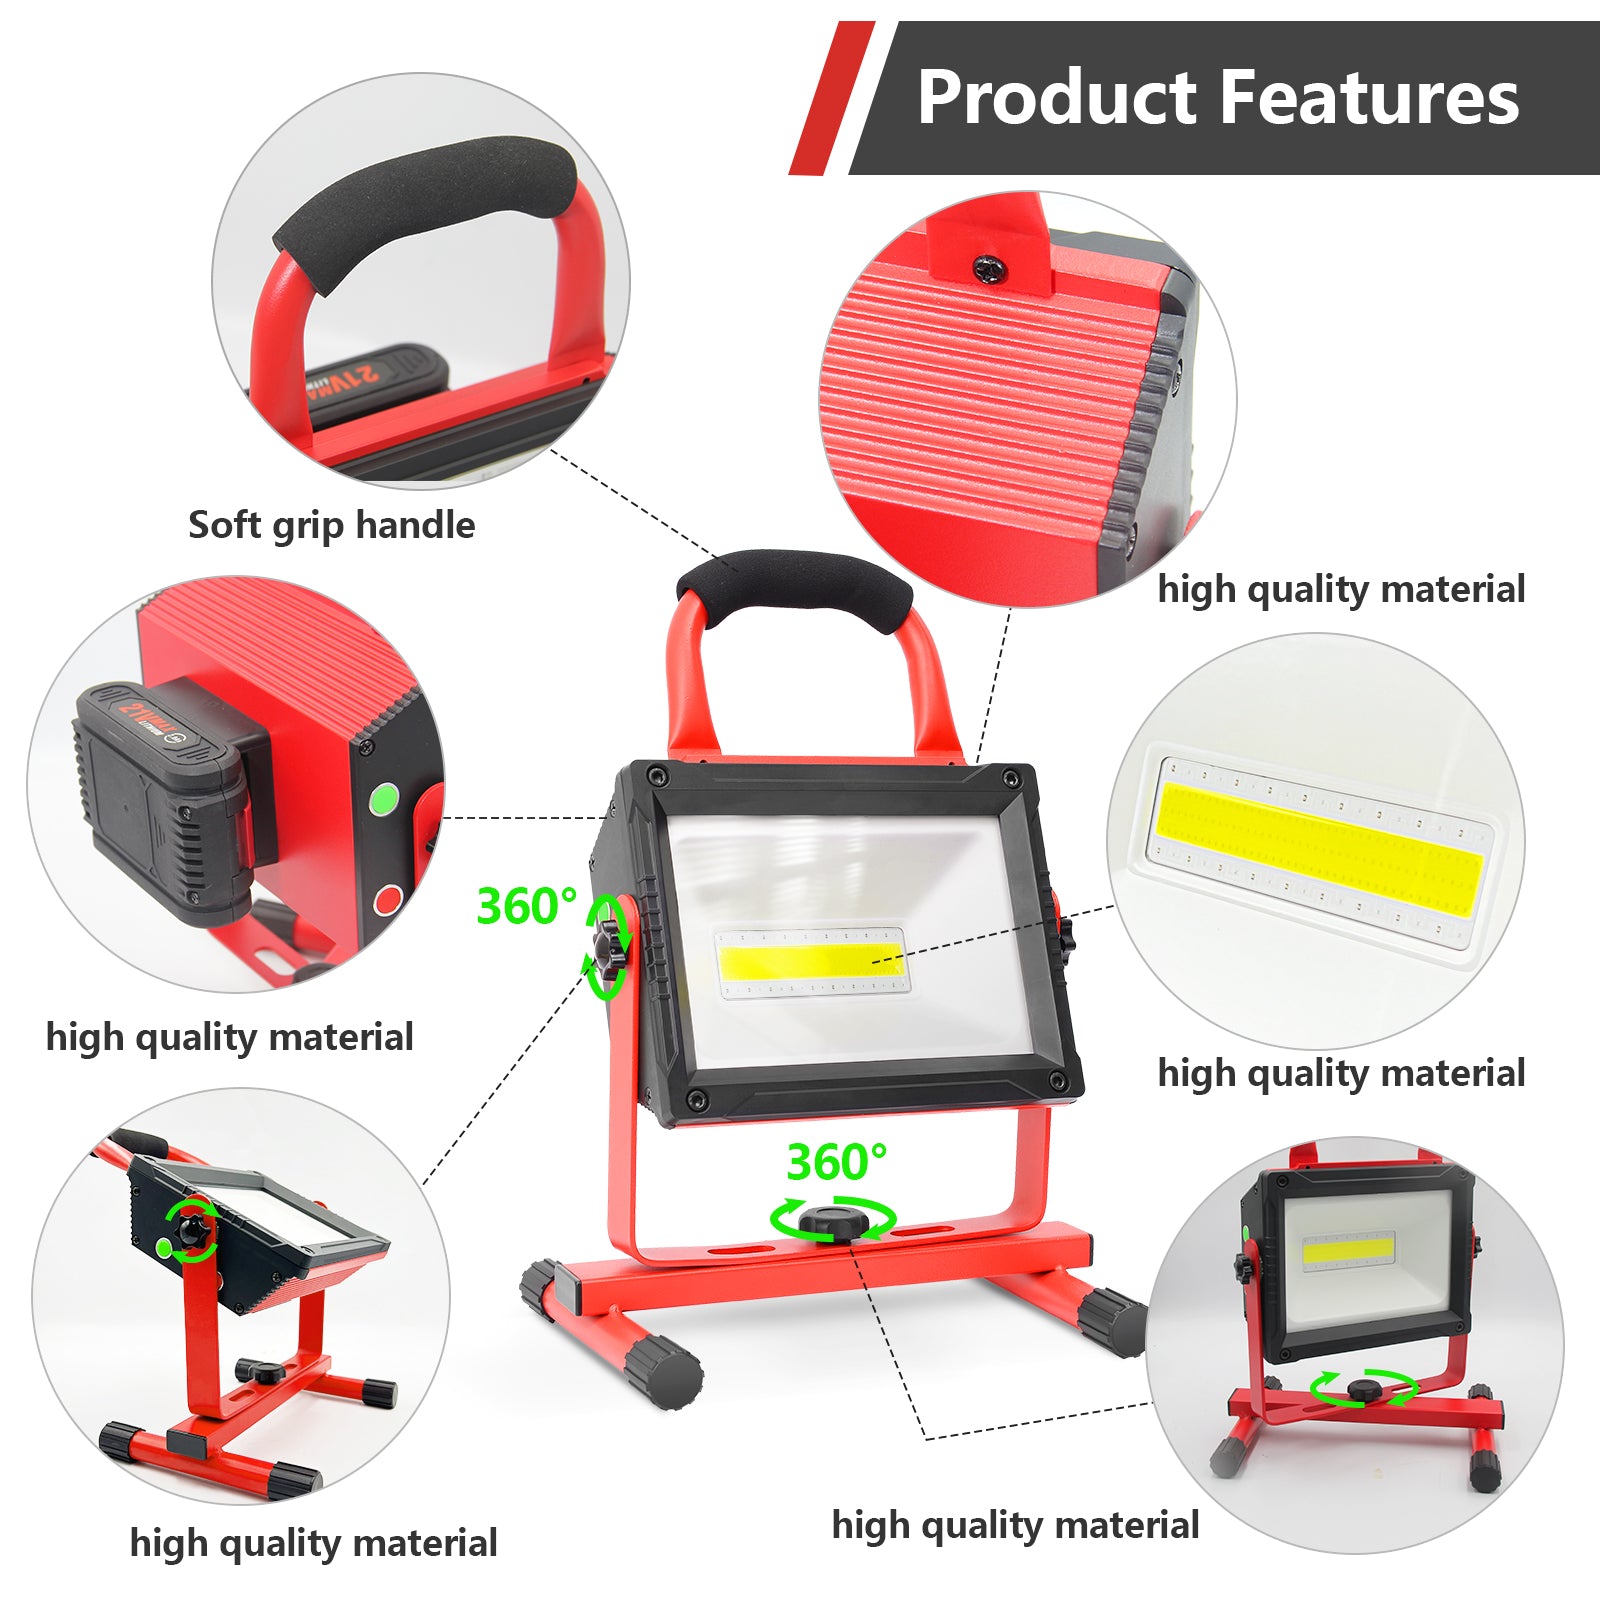 80W Rechargeable Work Light 8000LM with Replacement 21V 2.0Ah Battery